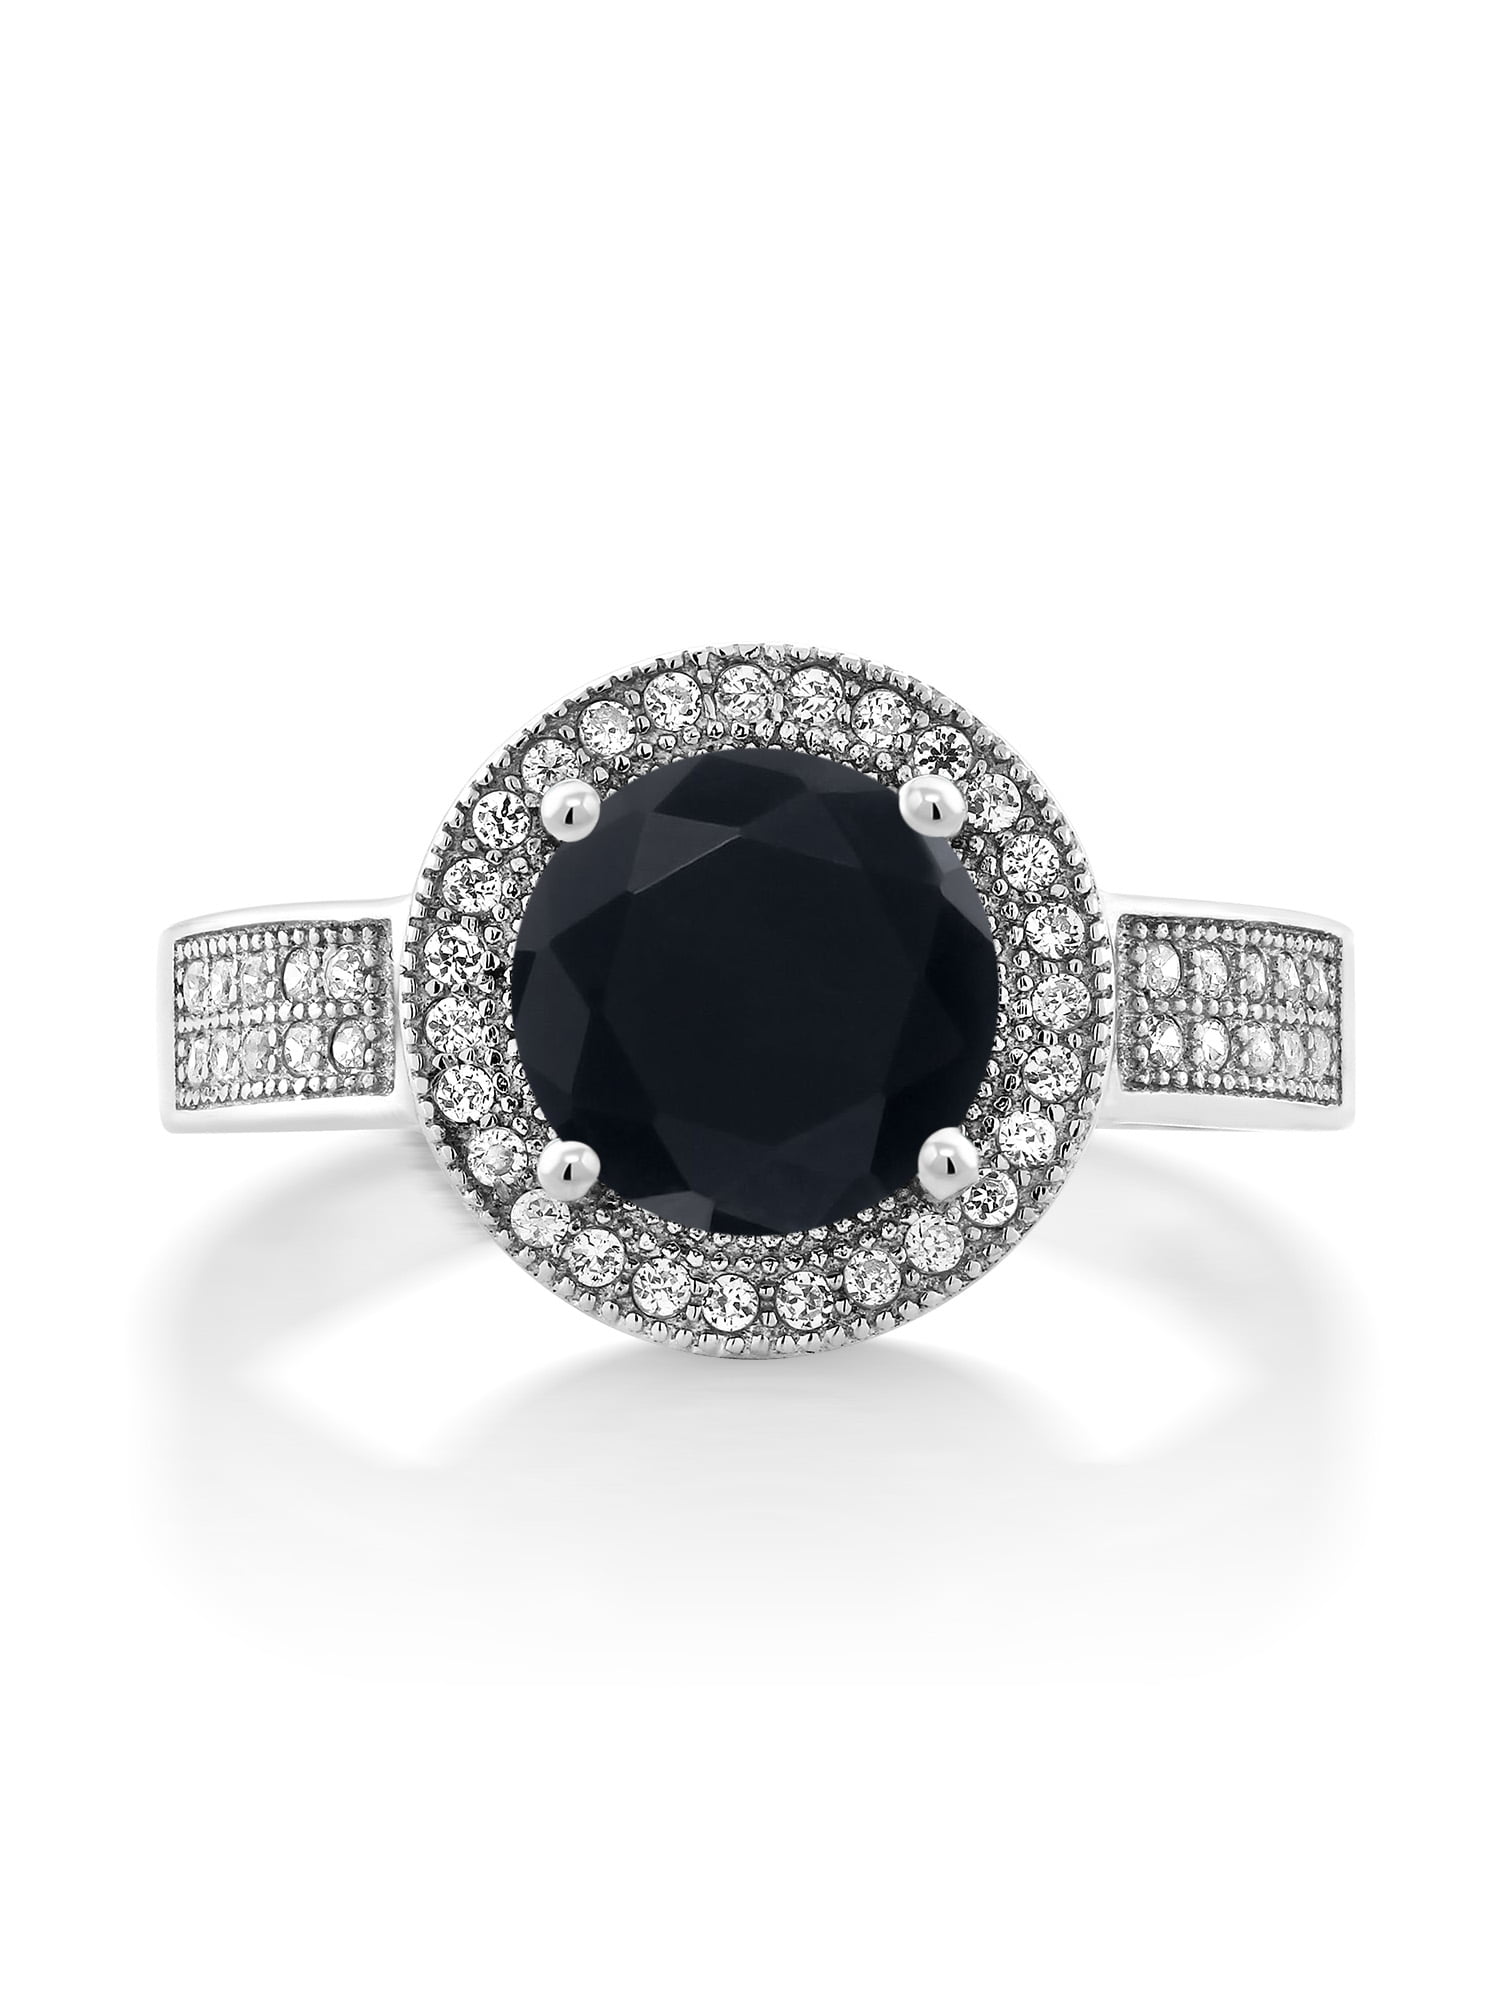 2.25 Ct Round Black Onyx 925 Sterling Silver Ring